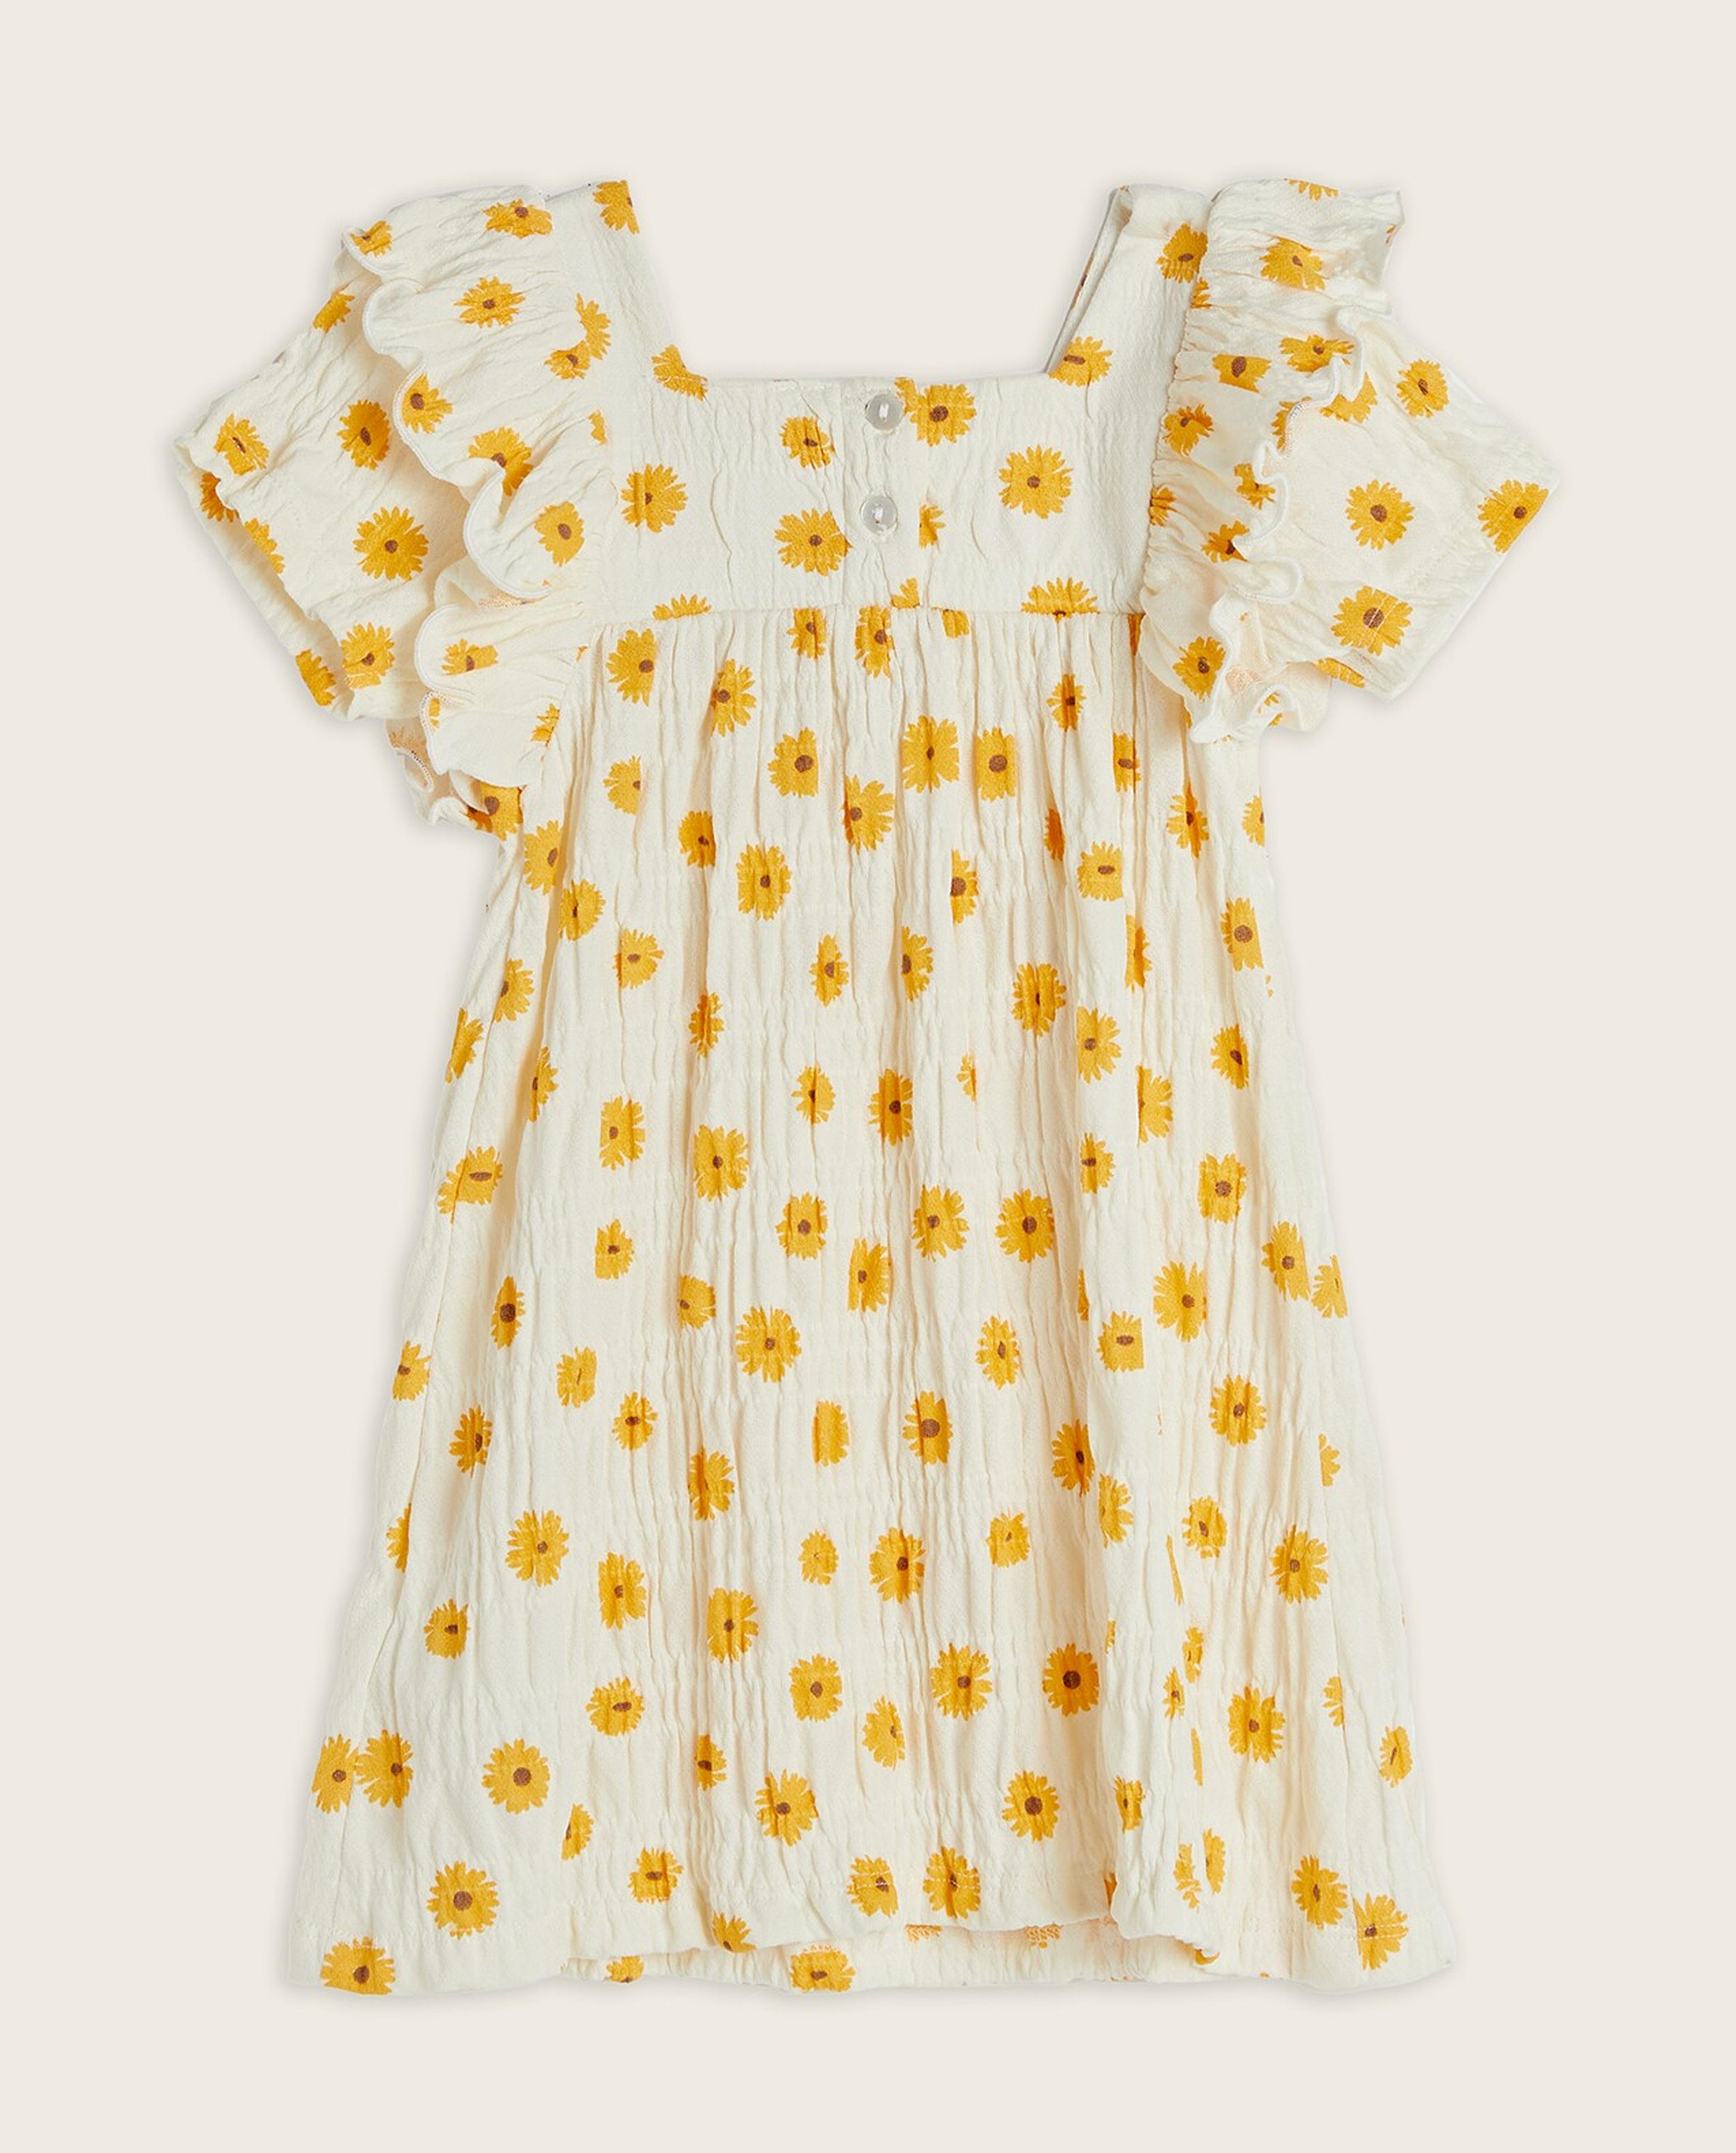 Printed A-Line Dress with Square Neck and Short Sleeves